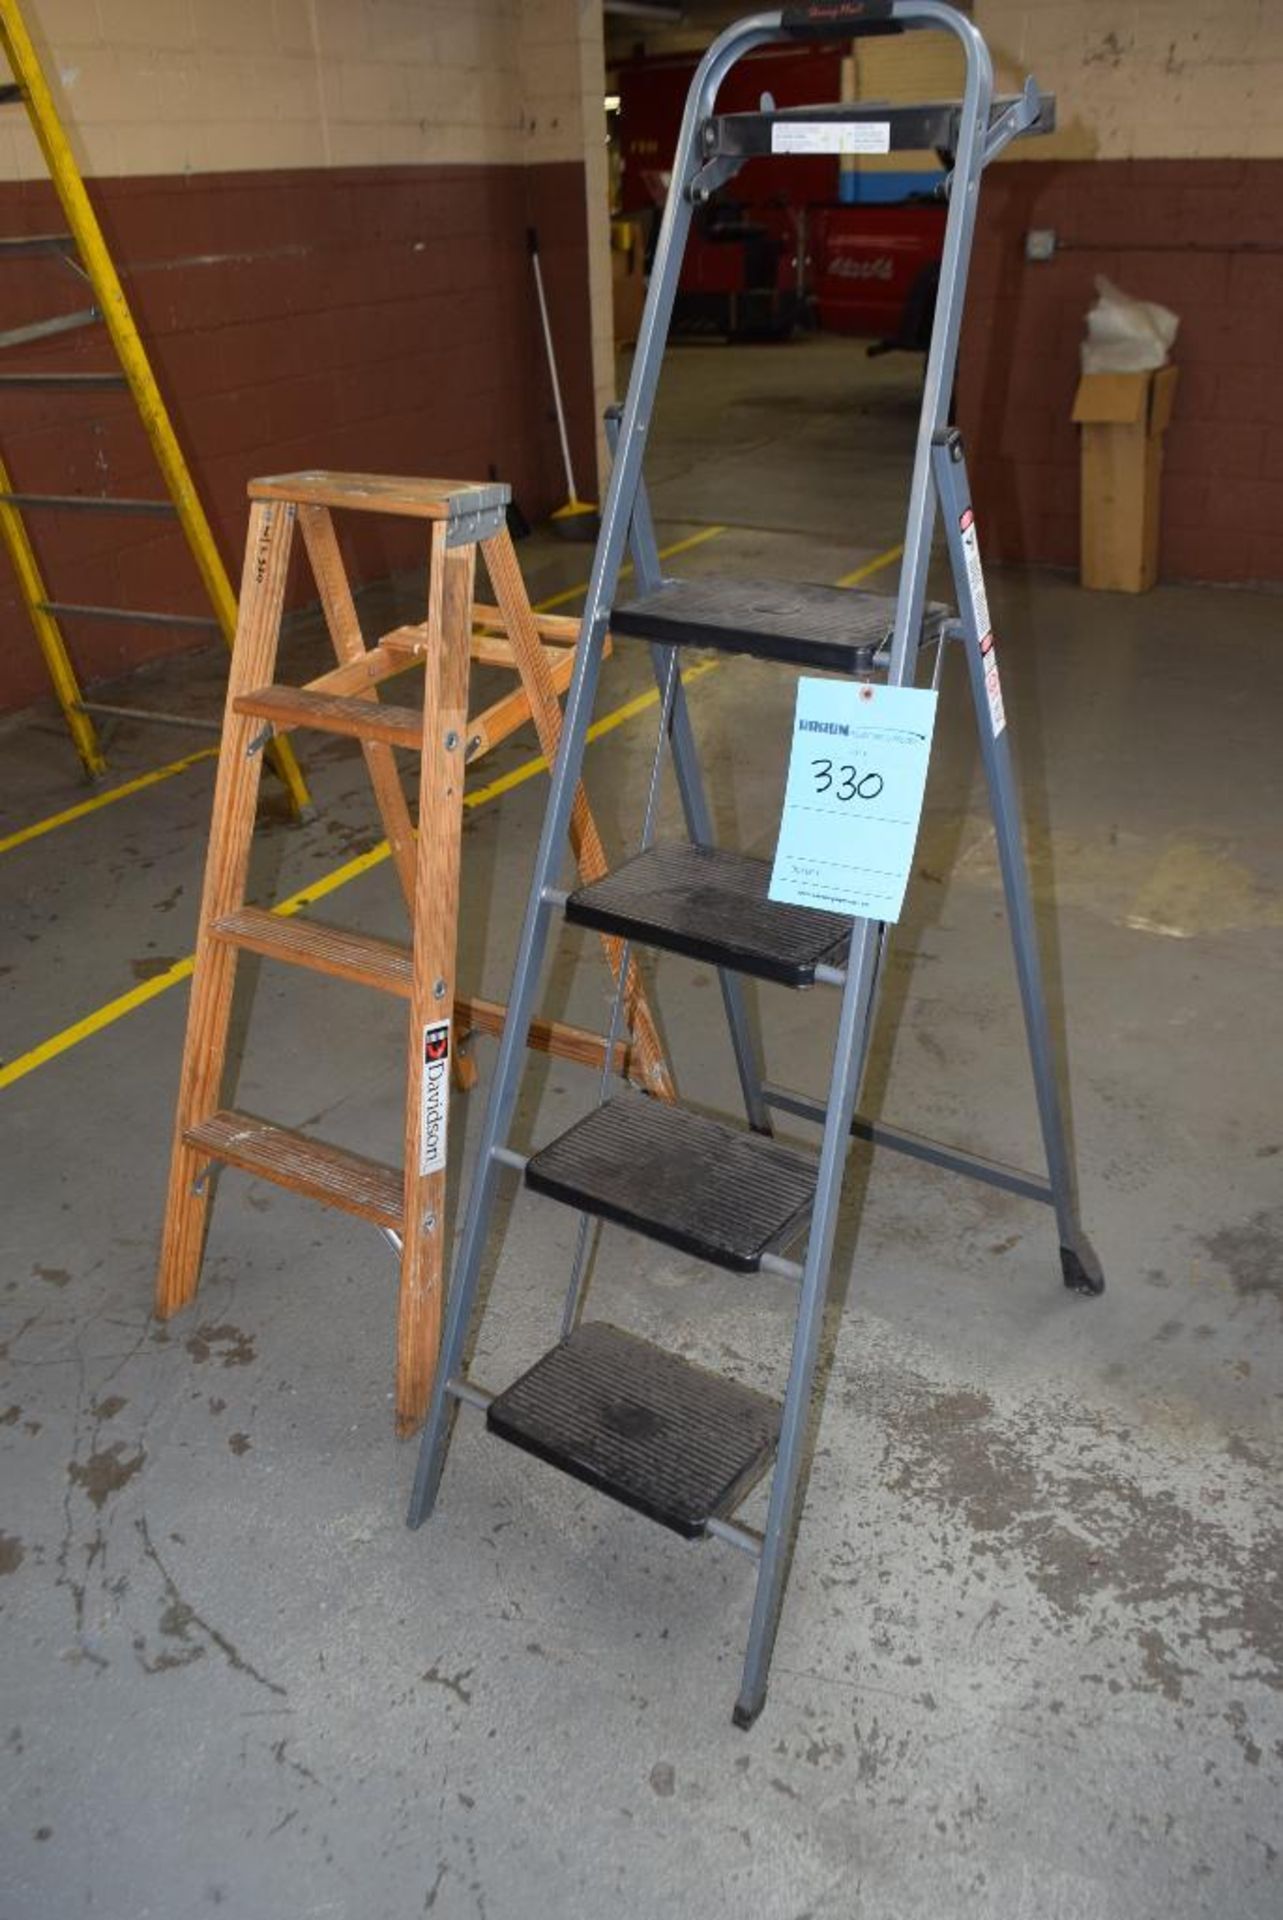 Lot of (2) ladders. (1) wood approximate 4' tall, (1) metal step ladder.